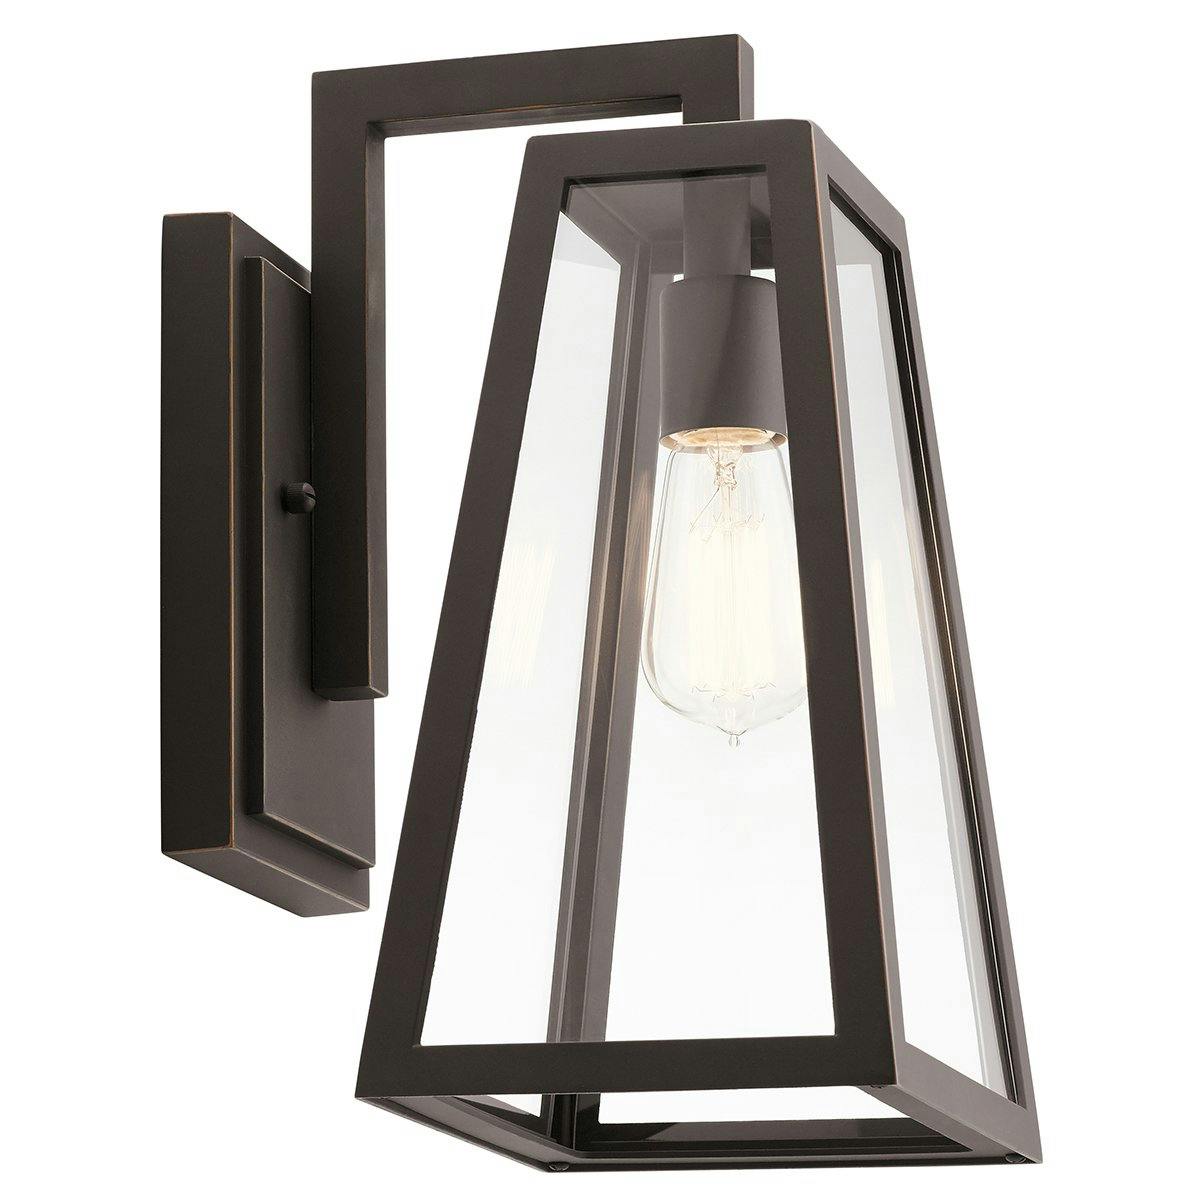 Delison 14" 1 Light Wall Light Bronze on a white background